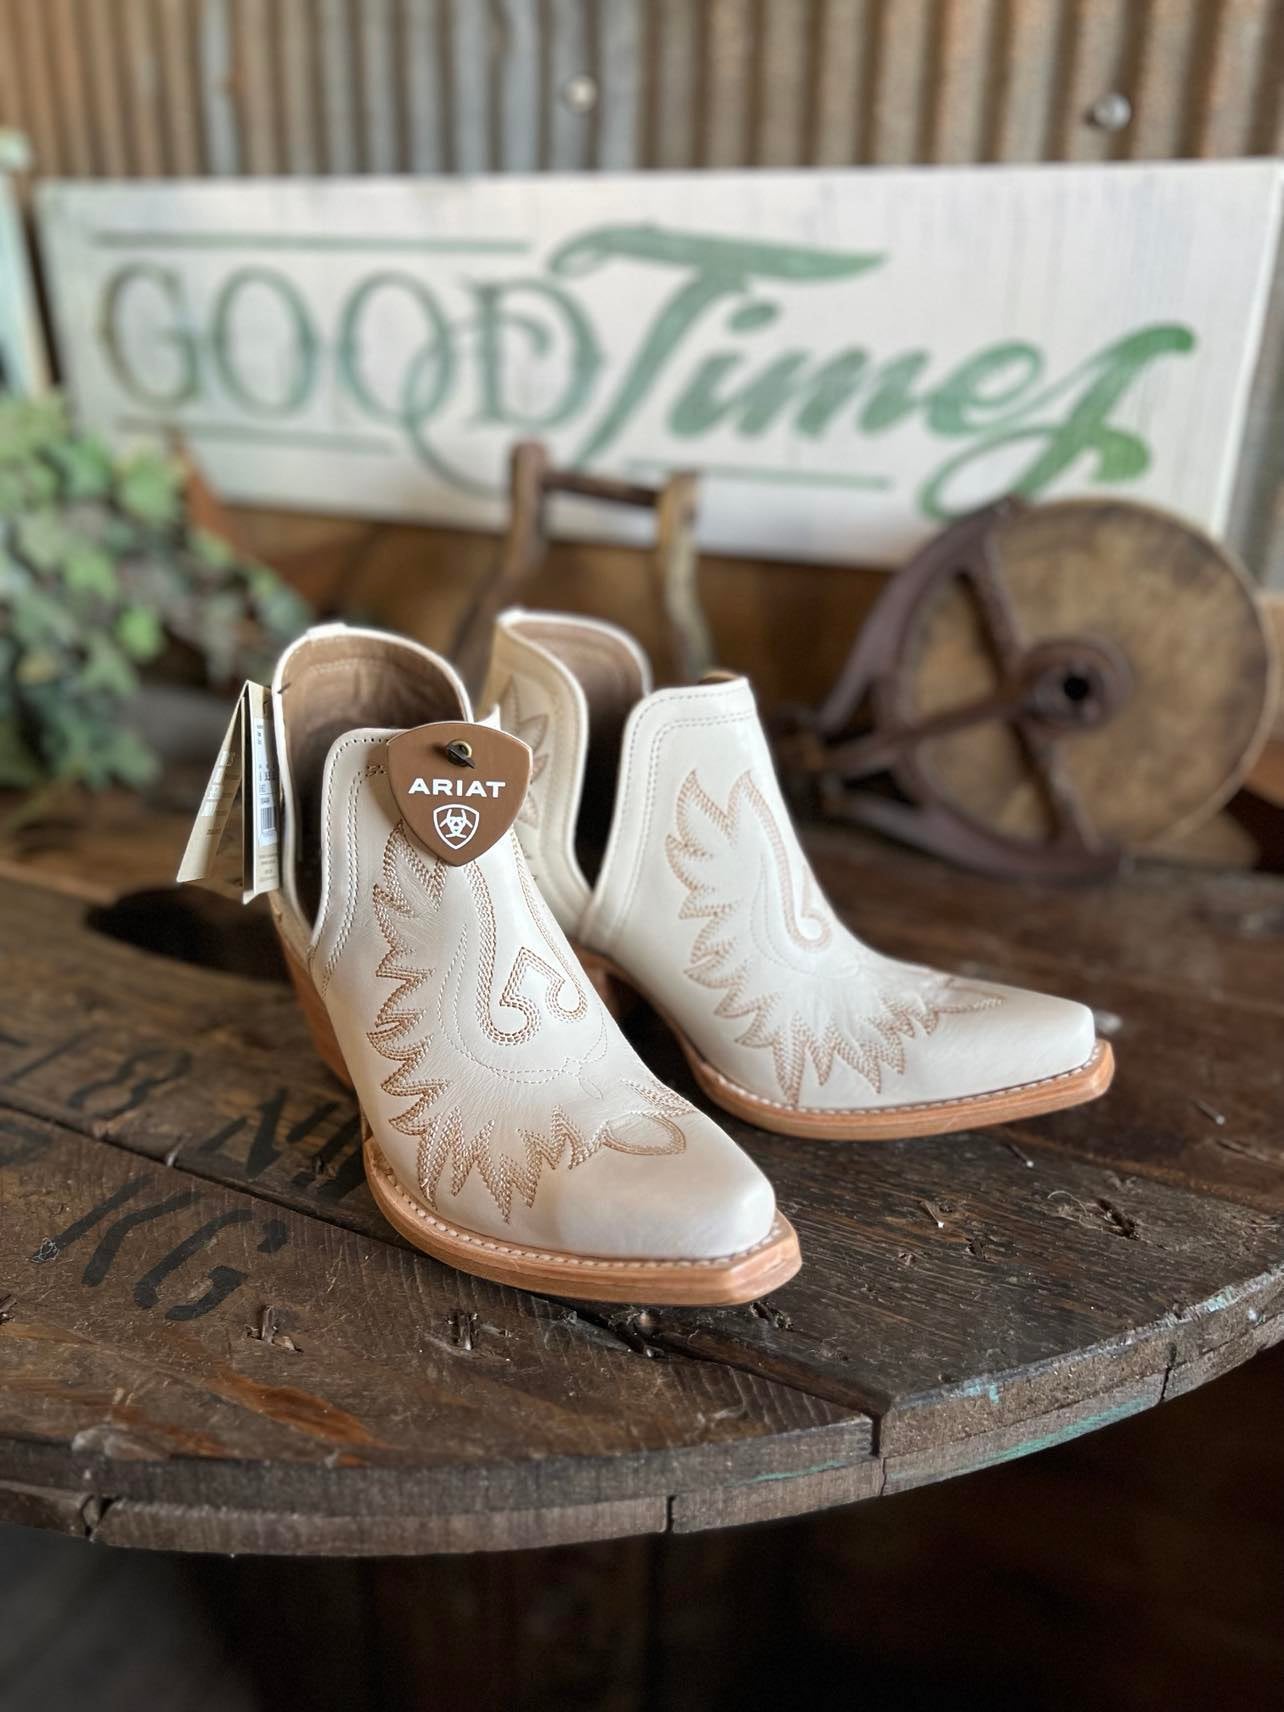 Womens Ariat Dixon Blanco Booties-Women's Booties-Ariat-Lucky J Boots & More, Women's, Men's, & Kids Western Store Located in Carthage, MO